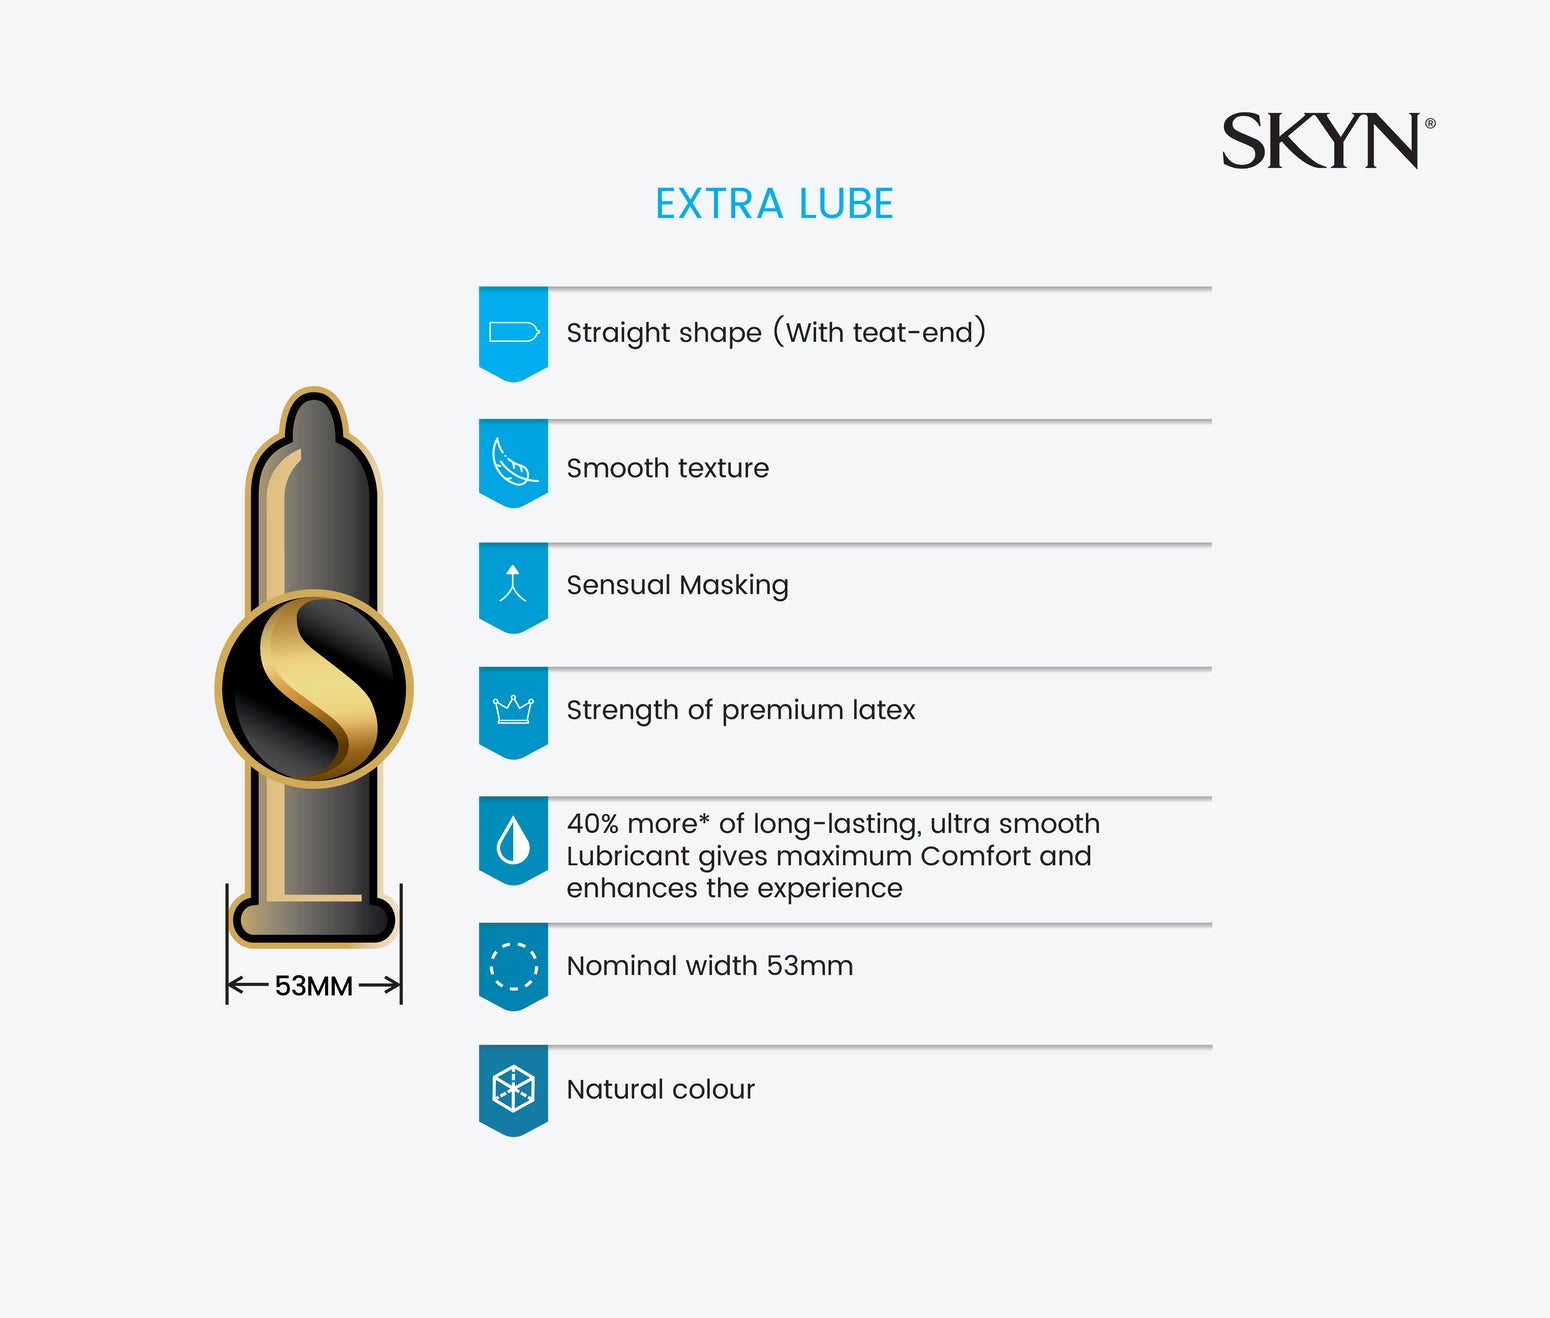 SKYN® EXTRA LUBE 10 PACK OF NON LATEX CONDOMS